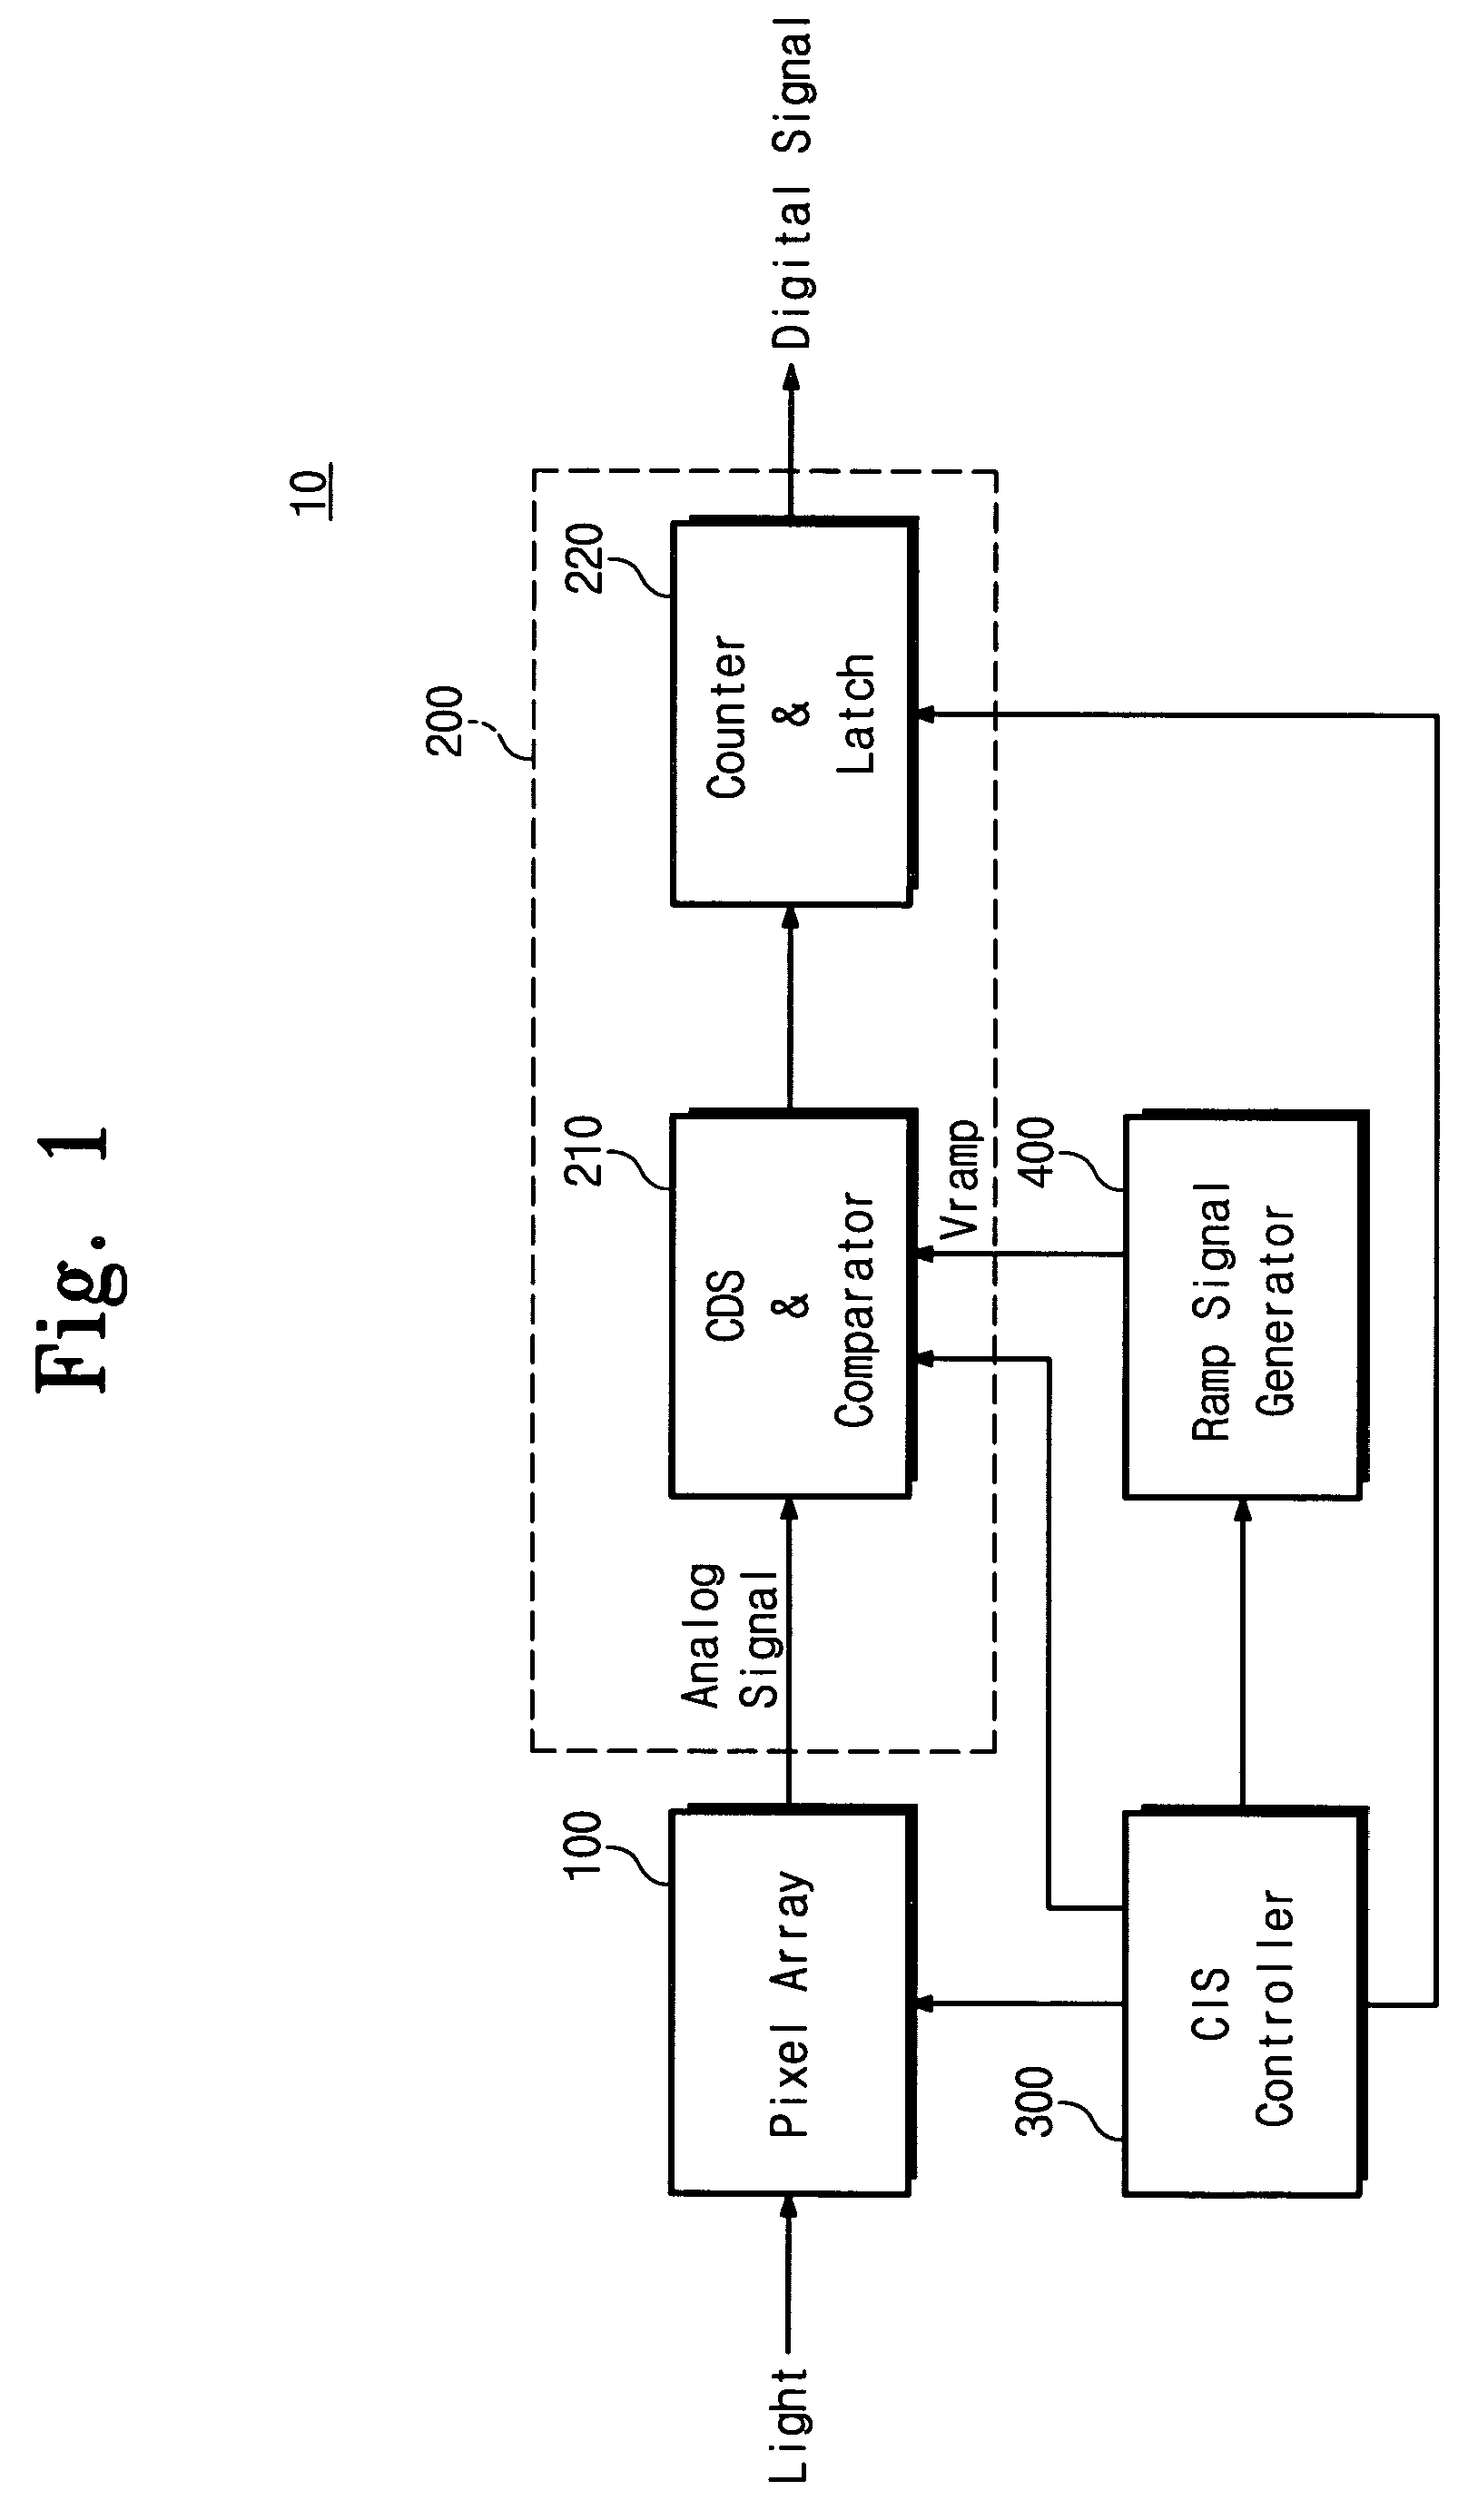 Analog-to-digital converter with noise compensation in CMOS image sensor